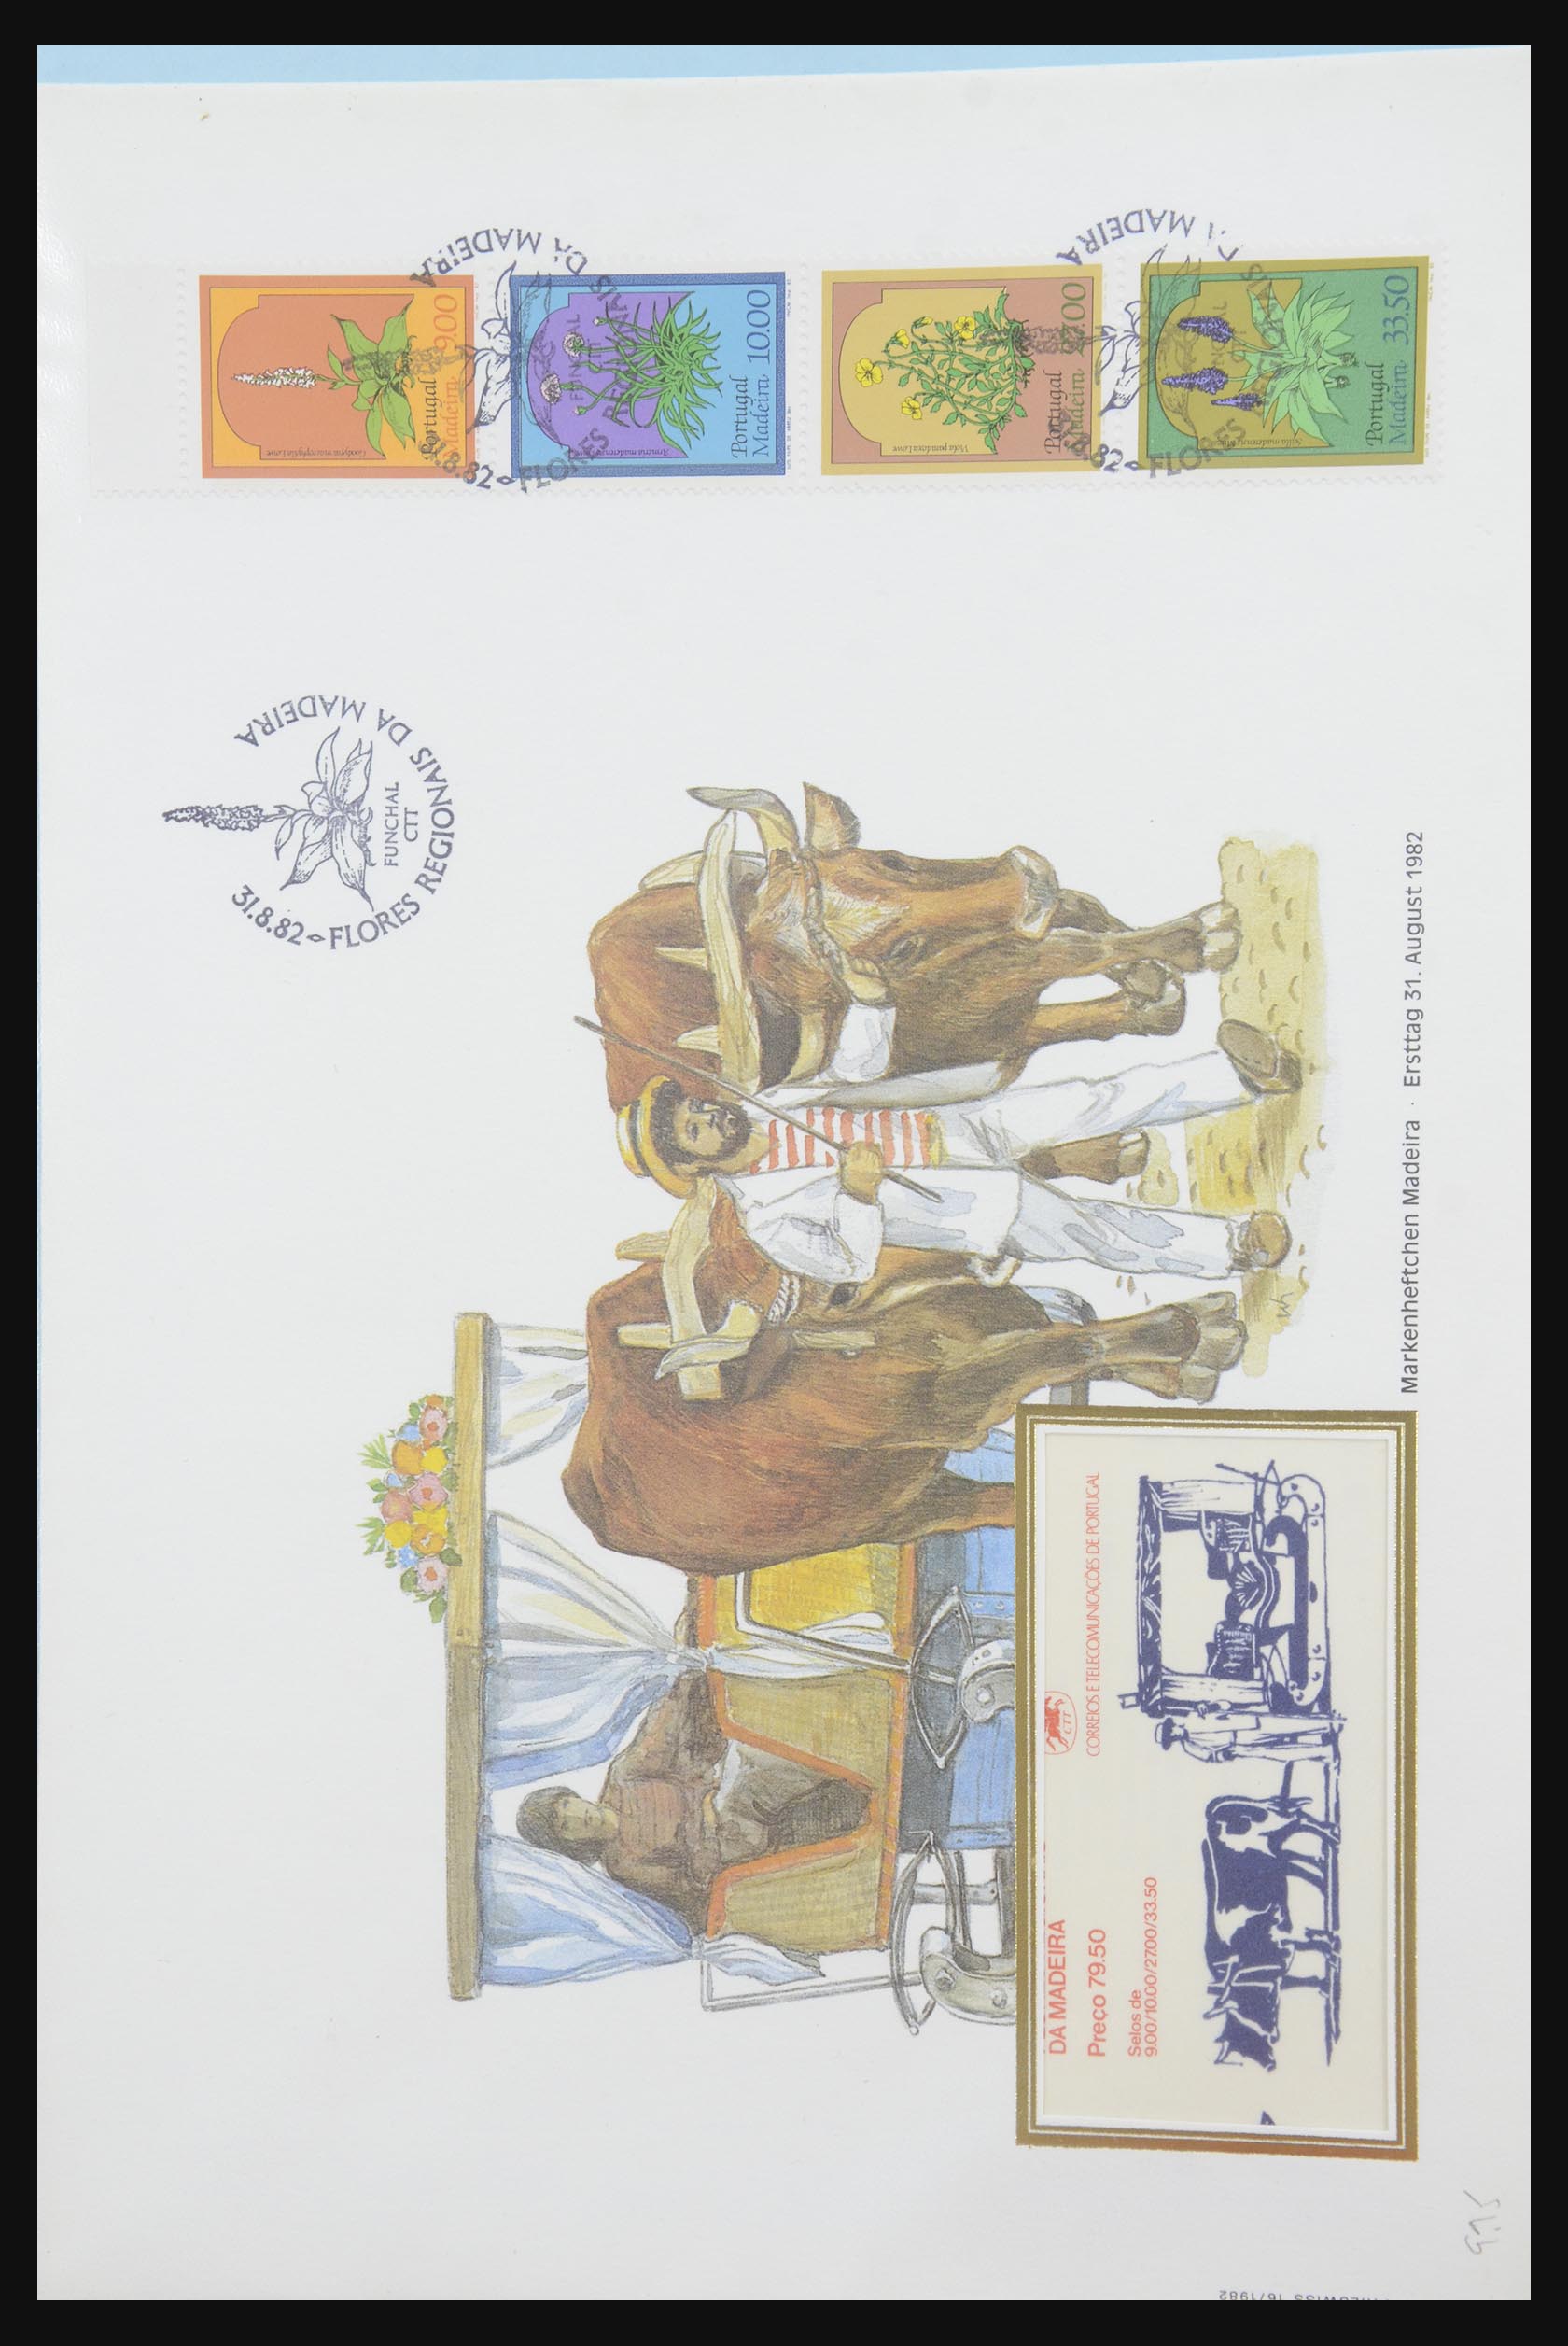 31915 097 - 31915 Western Europe souvenir sheets and stamp booklets on FDC.